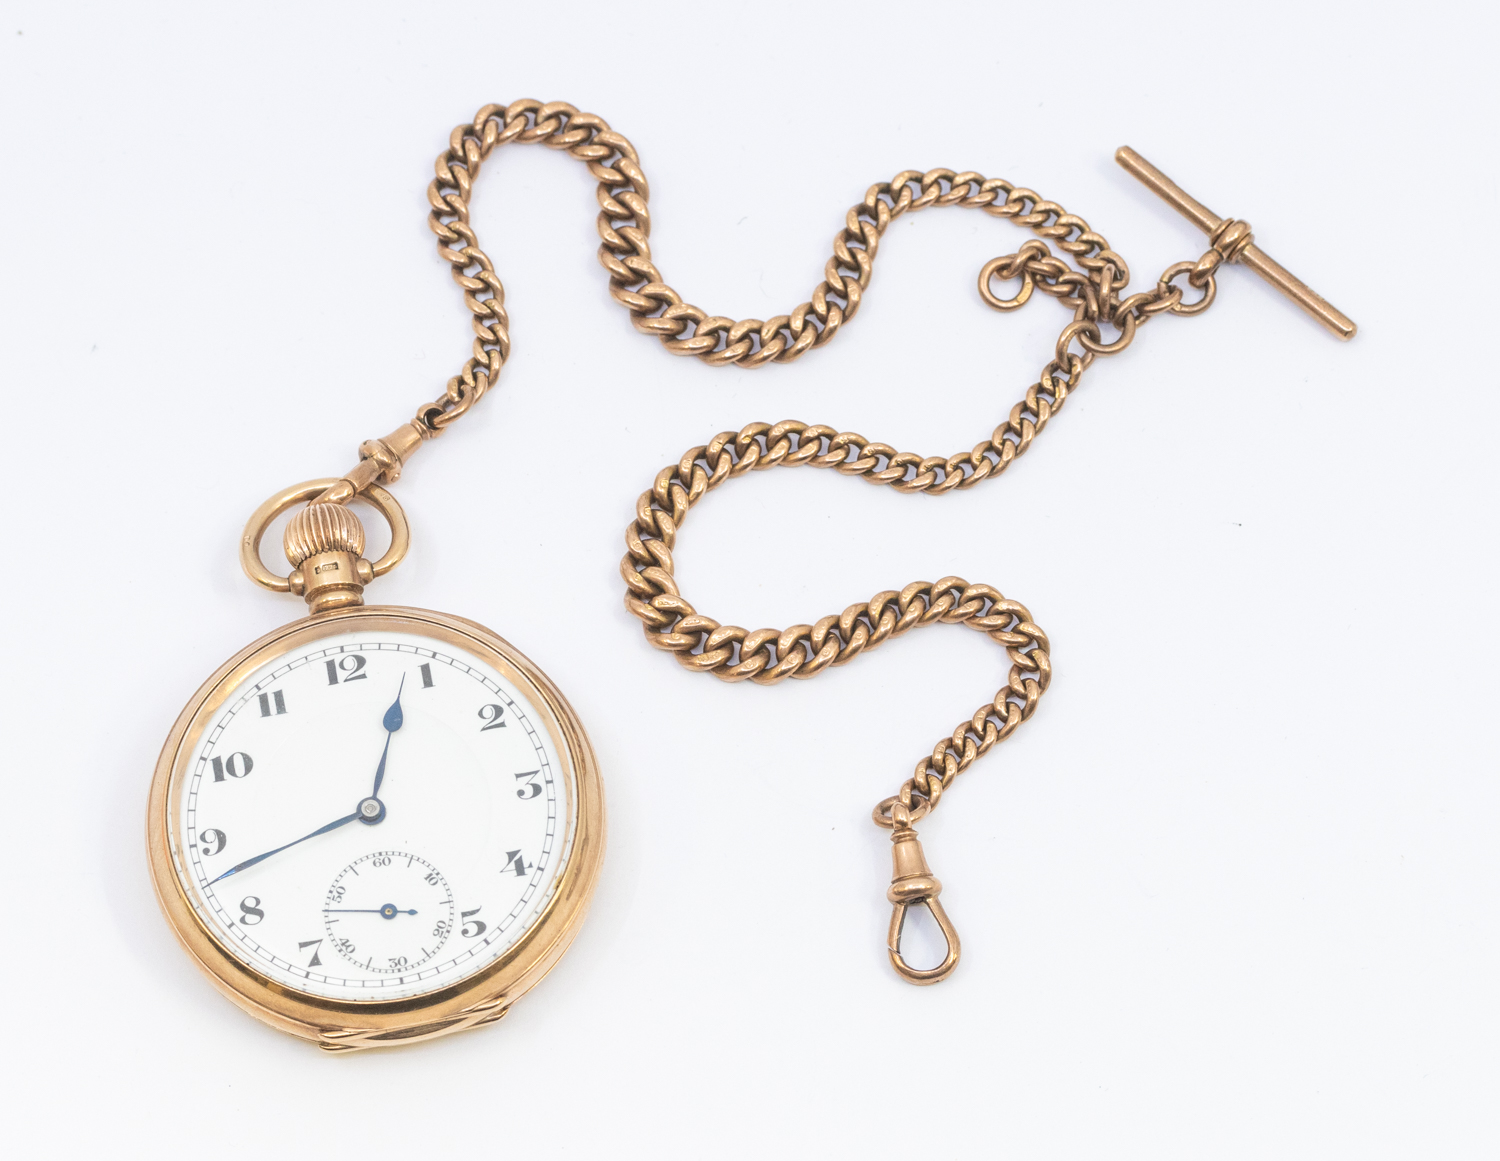 A 9ct gold open faced pocket watch, comprising a white enamel dial with Arabic markers, subsidiary